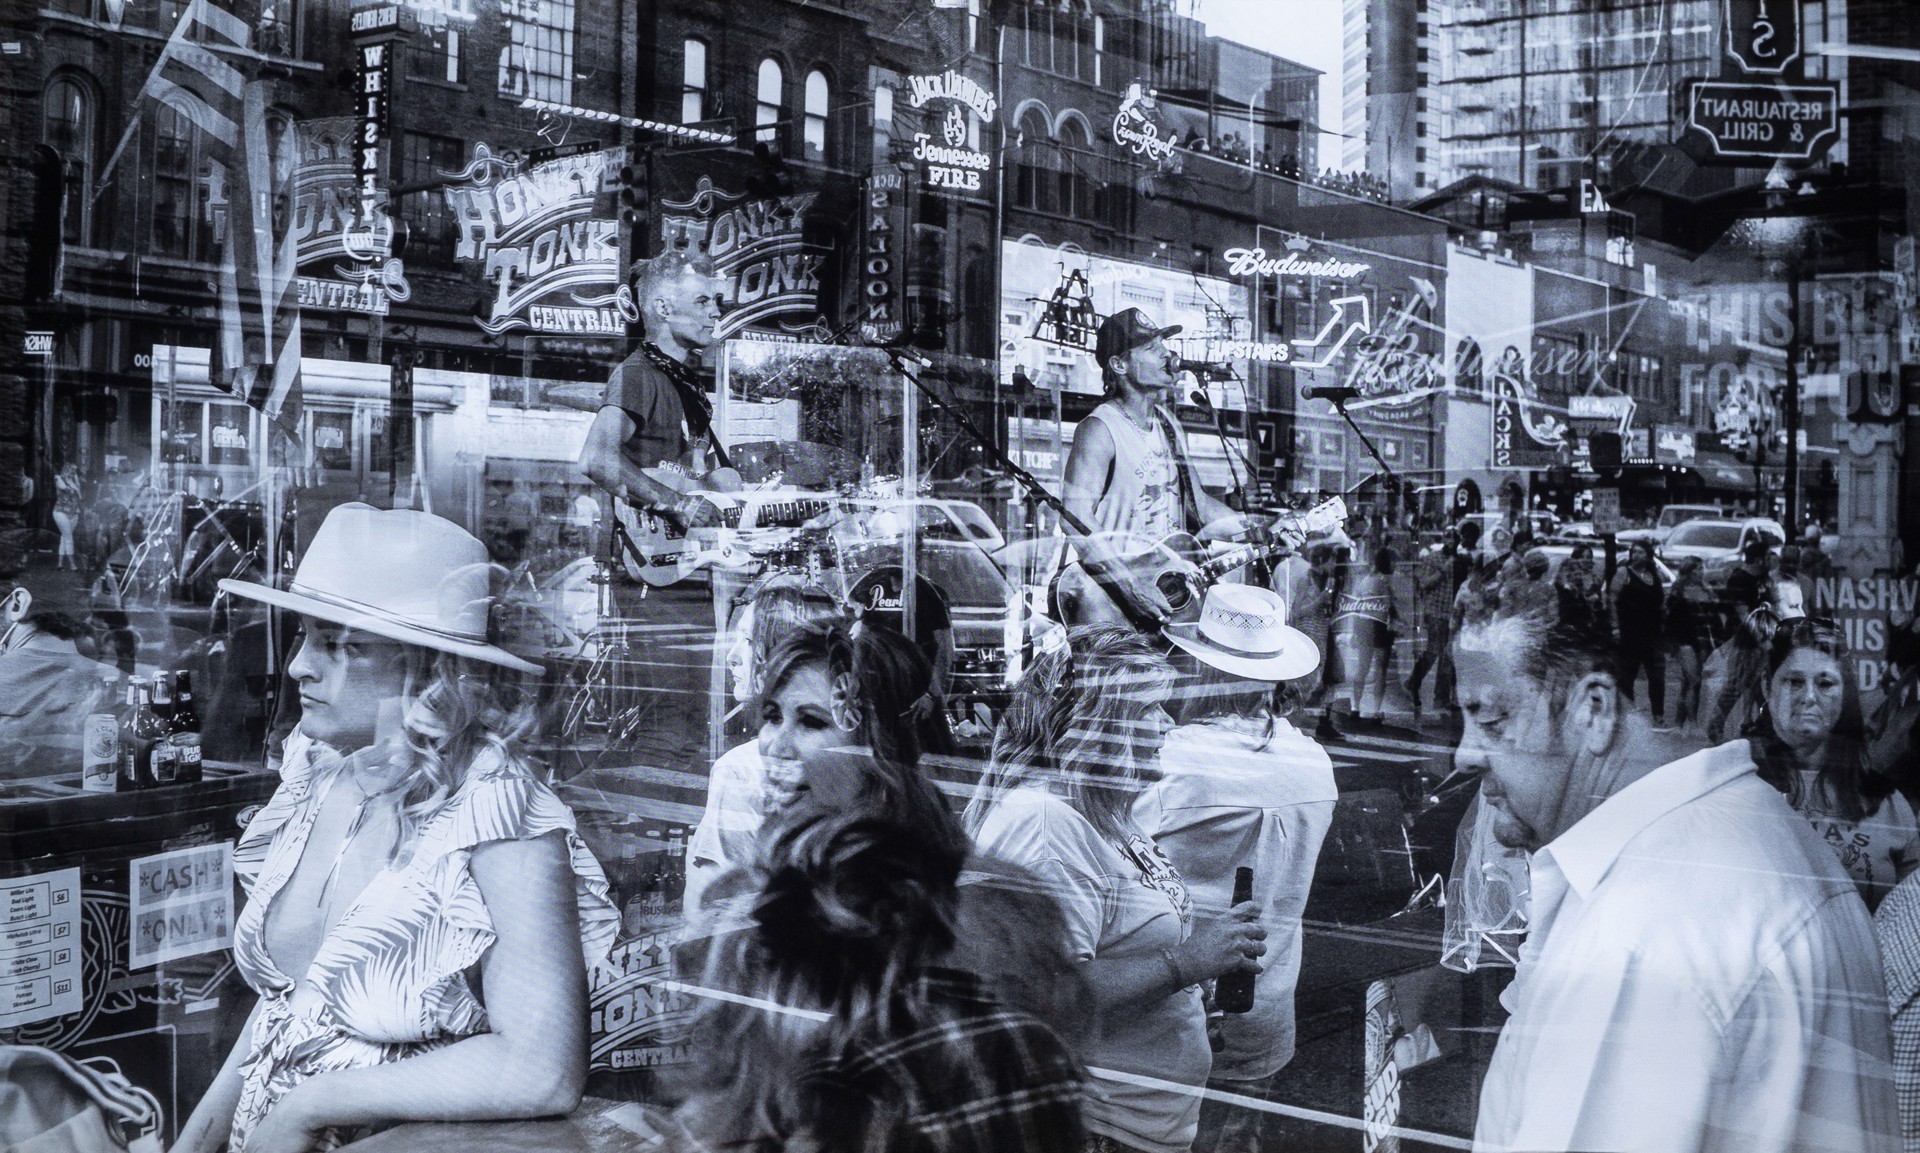 Honky Tonk Central by Michael Ray Nott